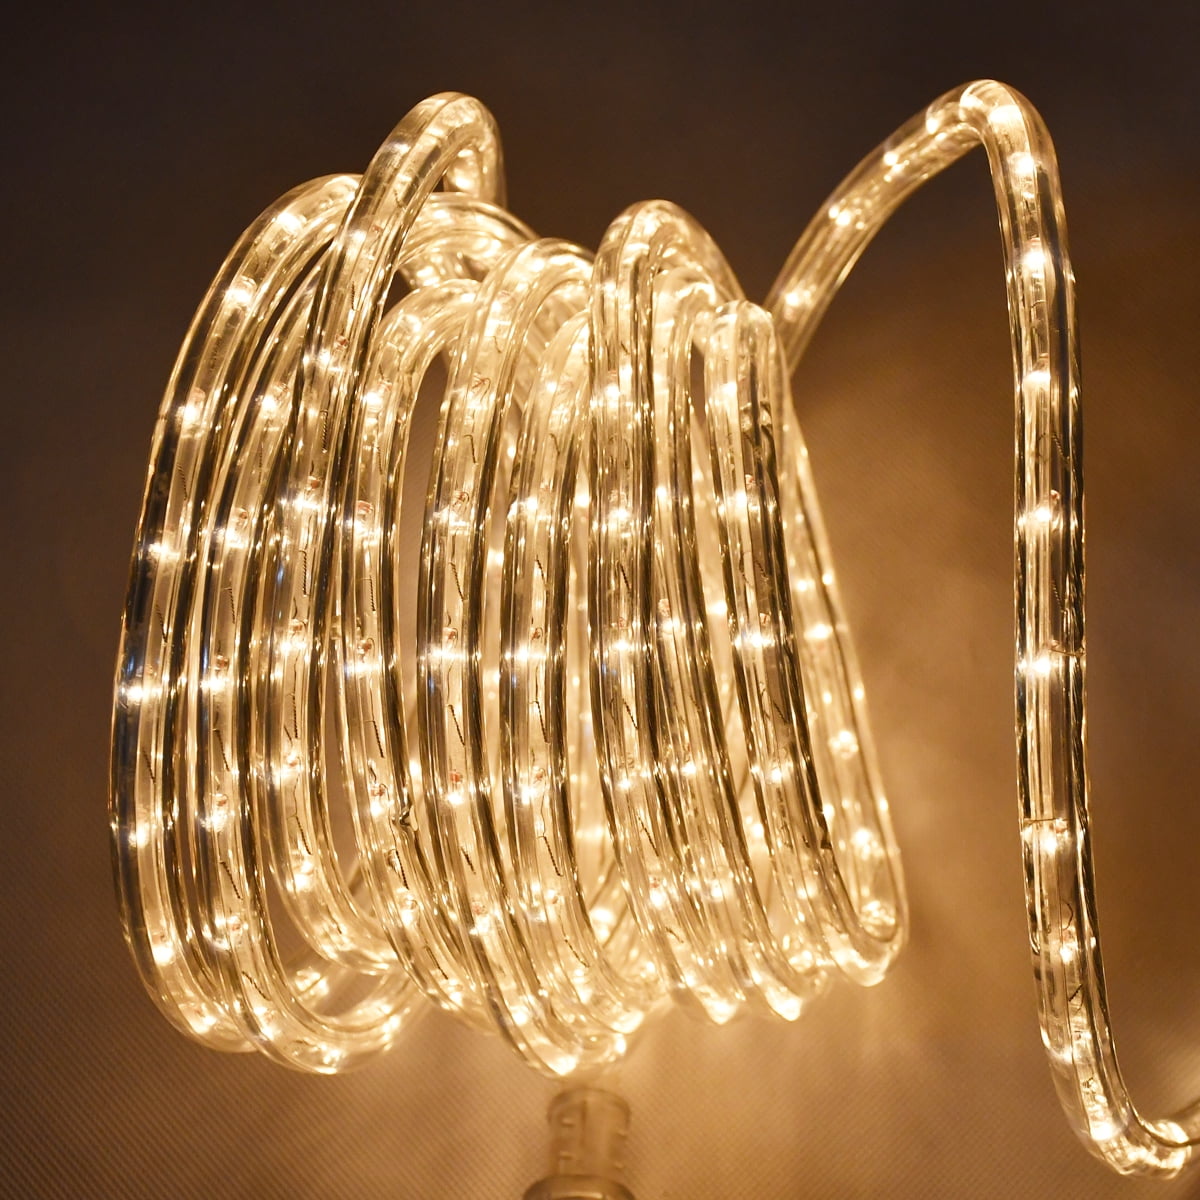 Mainstays 10 Count Clear String Lights Tube Style Decorative Indoor 9 feet